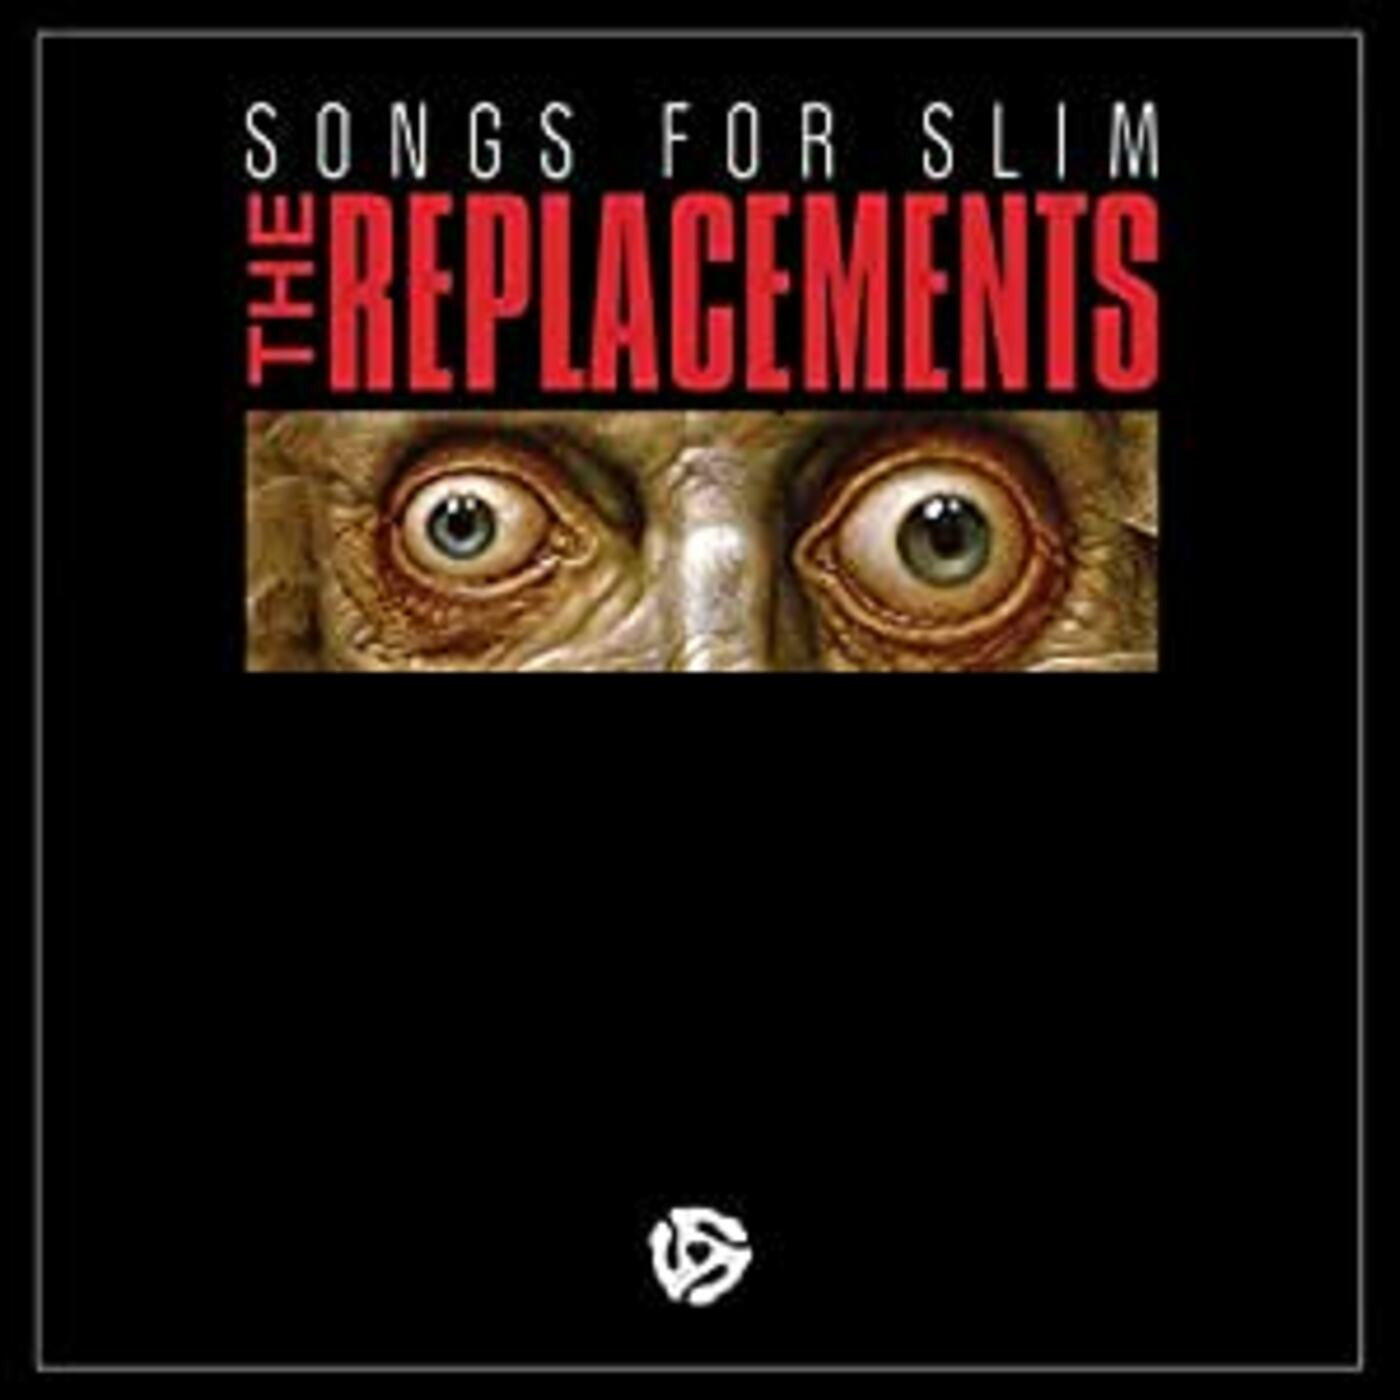 The Replacements - Songs for Slim 12"